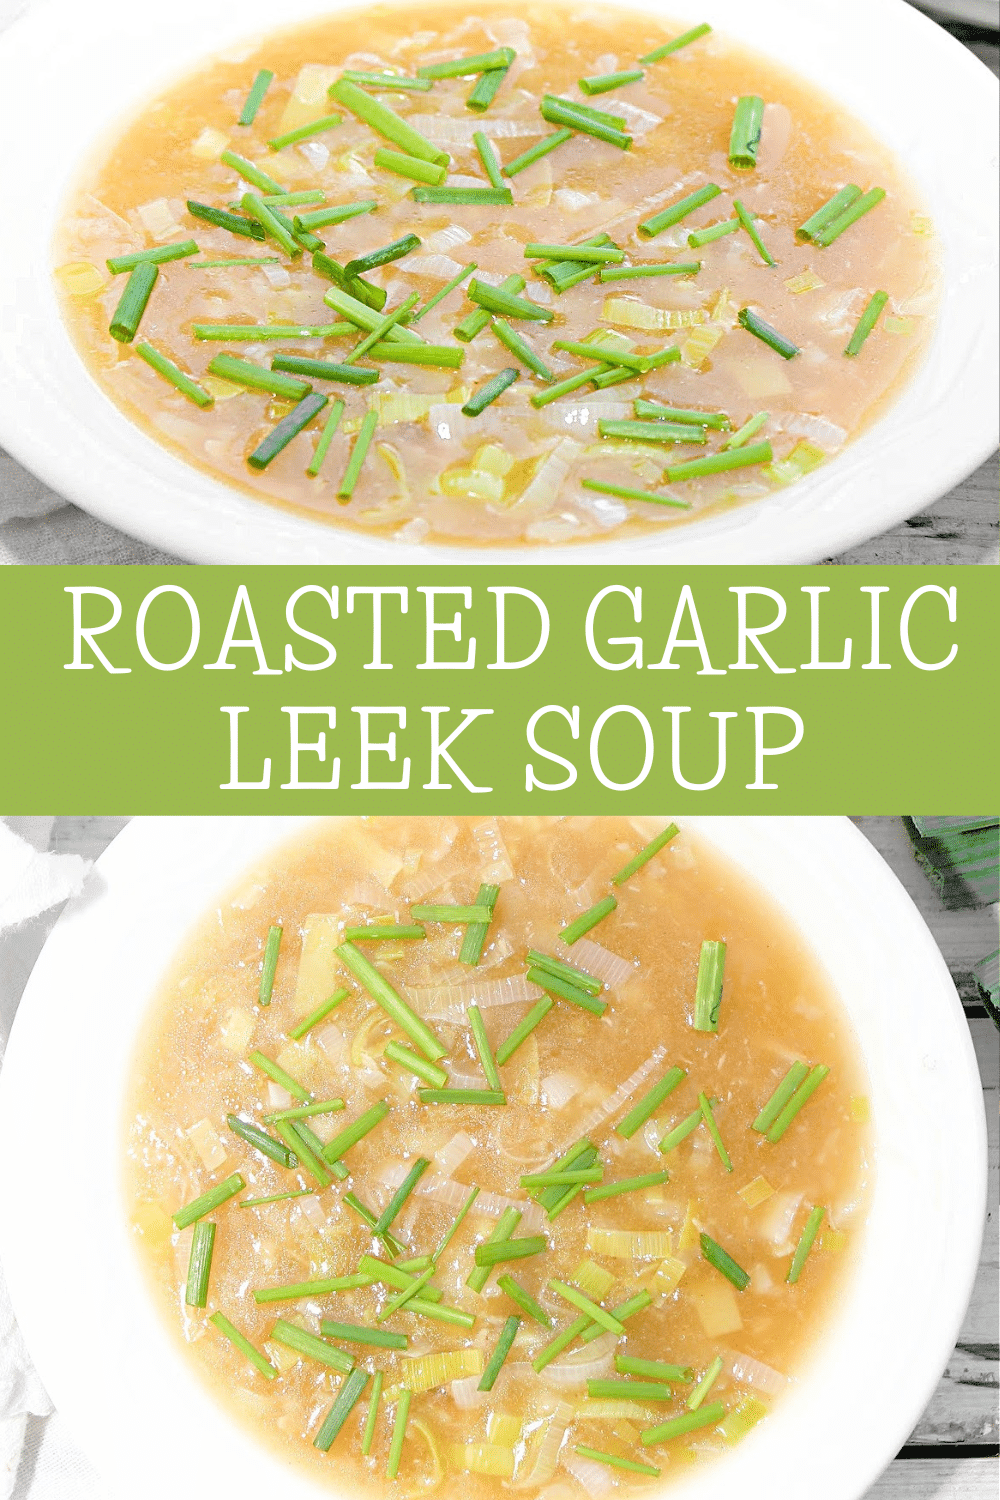 Roasted Garlic and Leek Soup ~ Rich, flavorful, and highly aromatic! This comforting soup is easy to make with simple ingredients. via @thiswifecooks